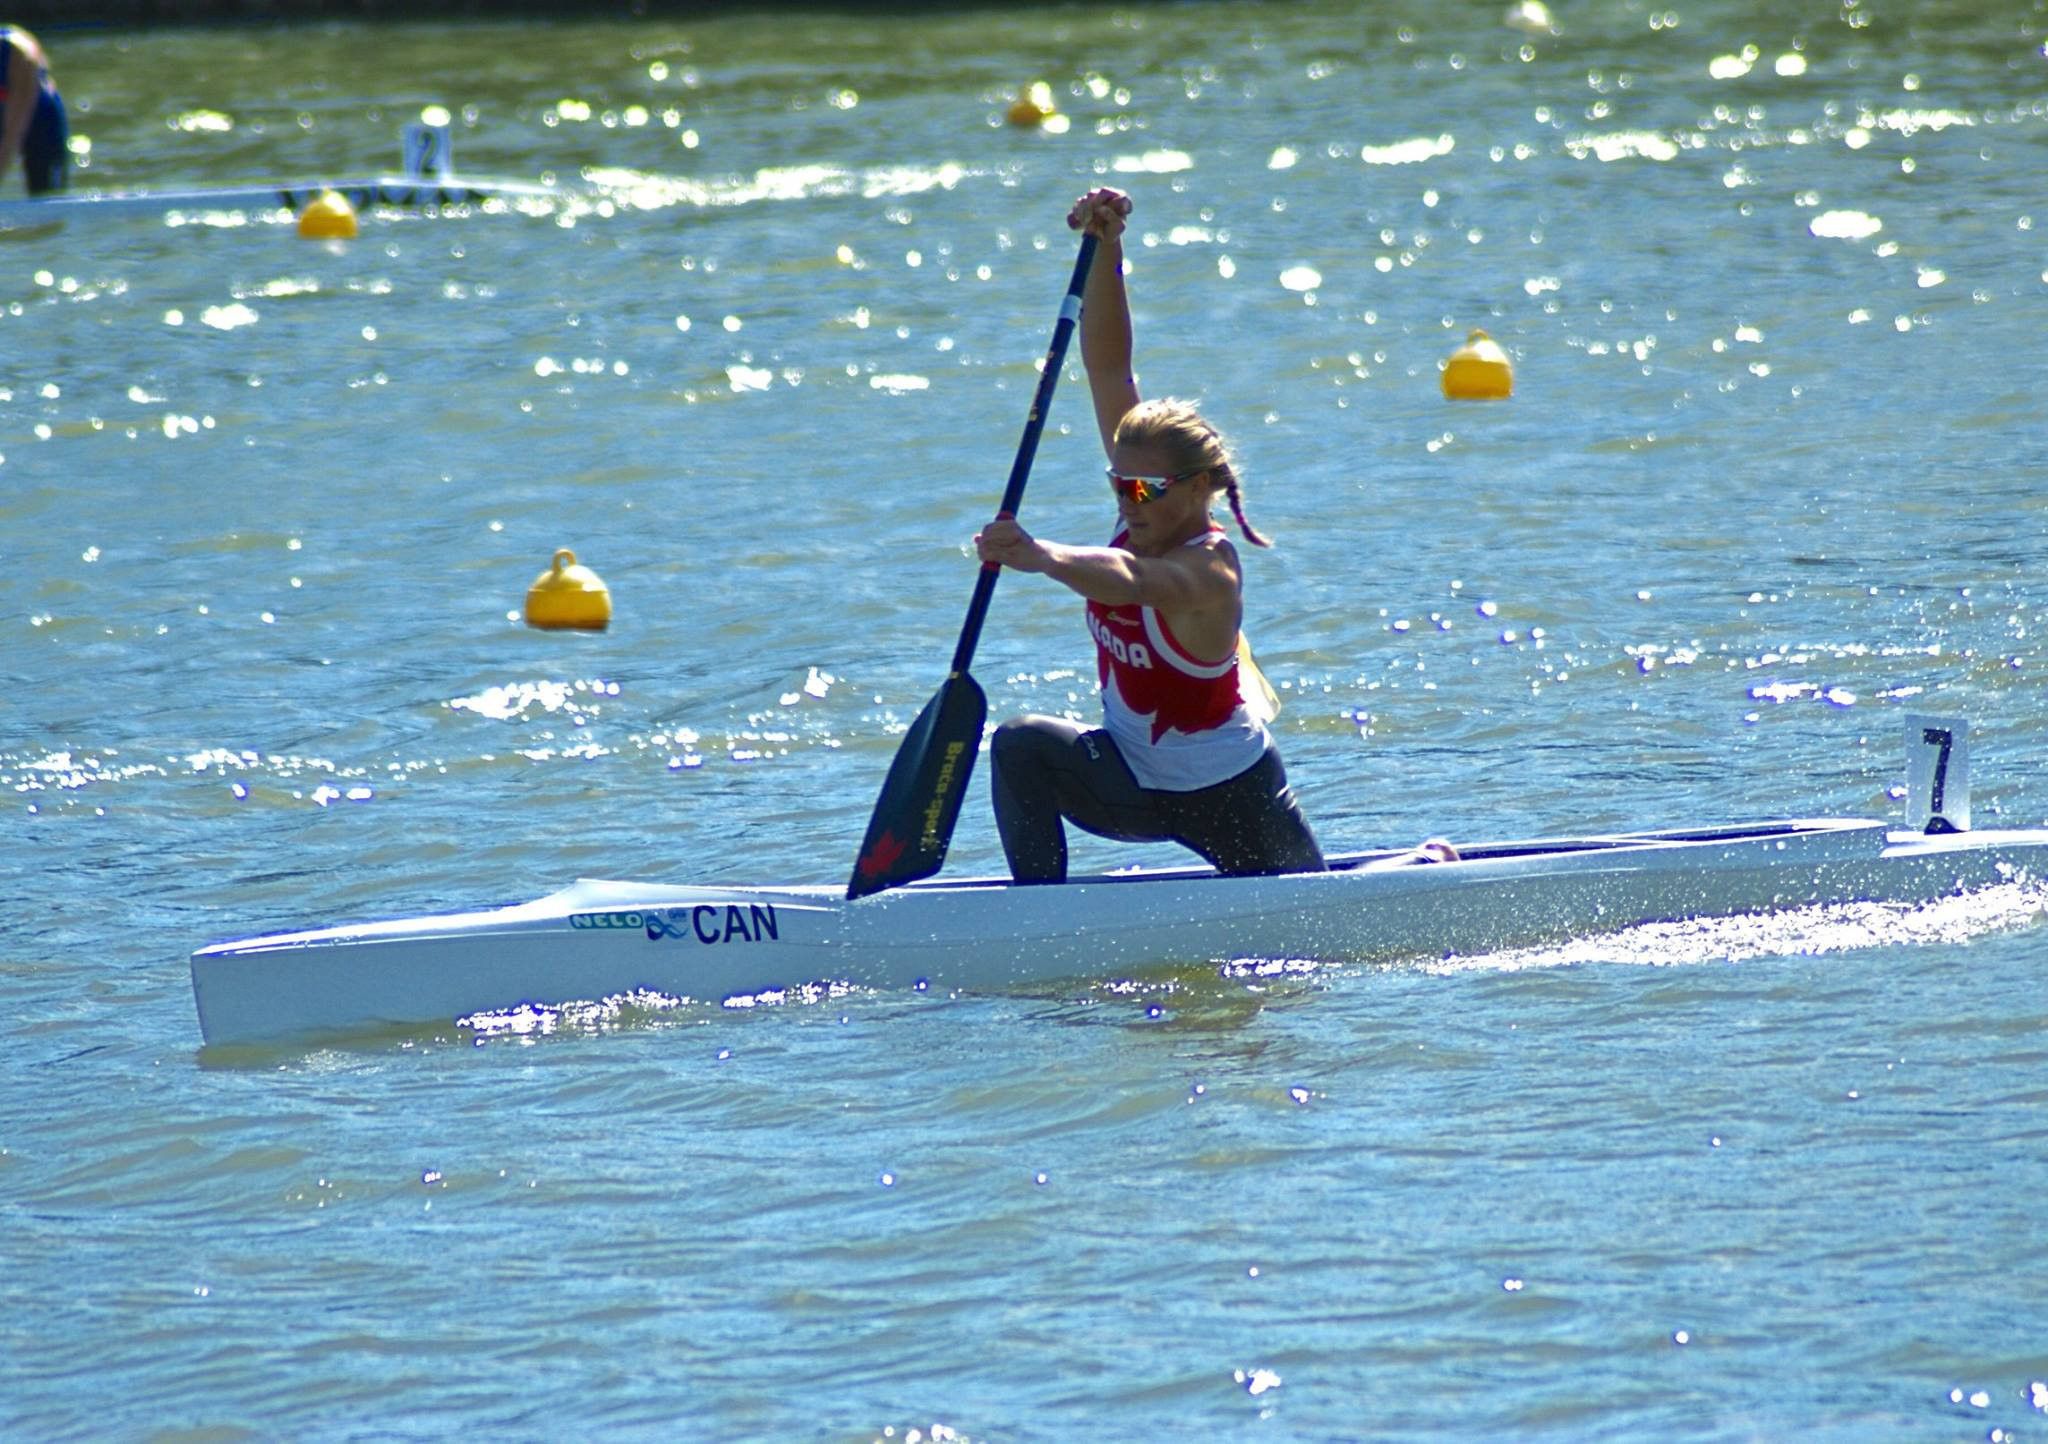 Jensen earns second gold of 2019 Junior and Under-23 Canoe Sprint World Championships